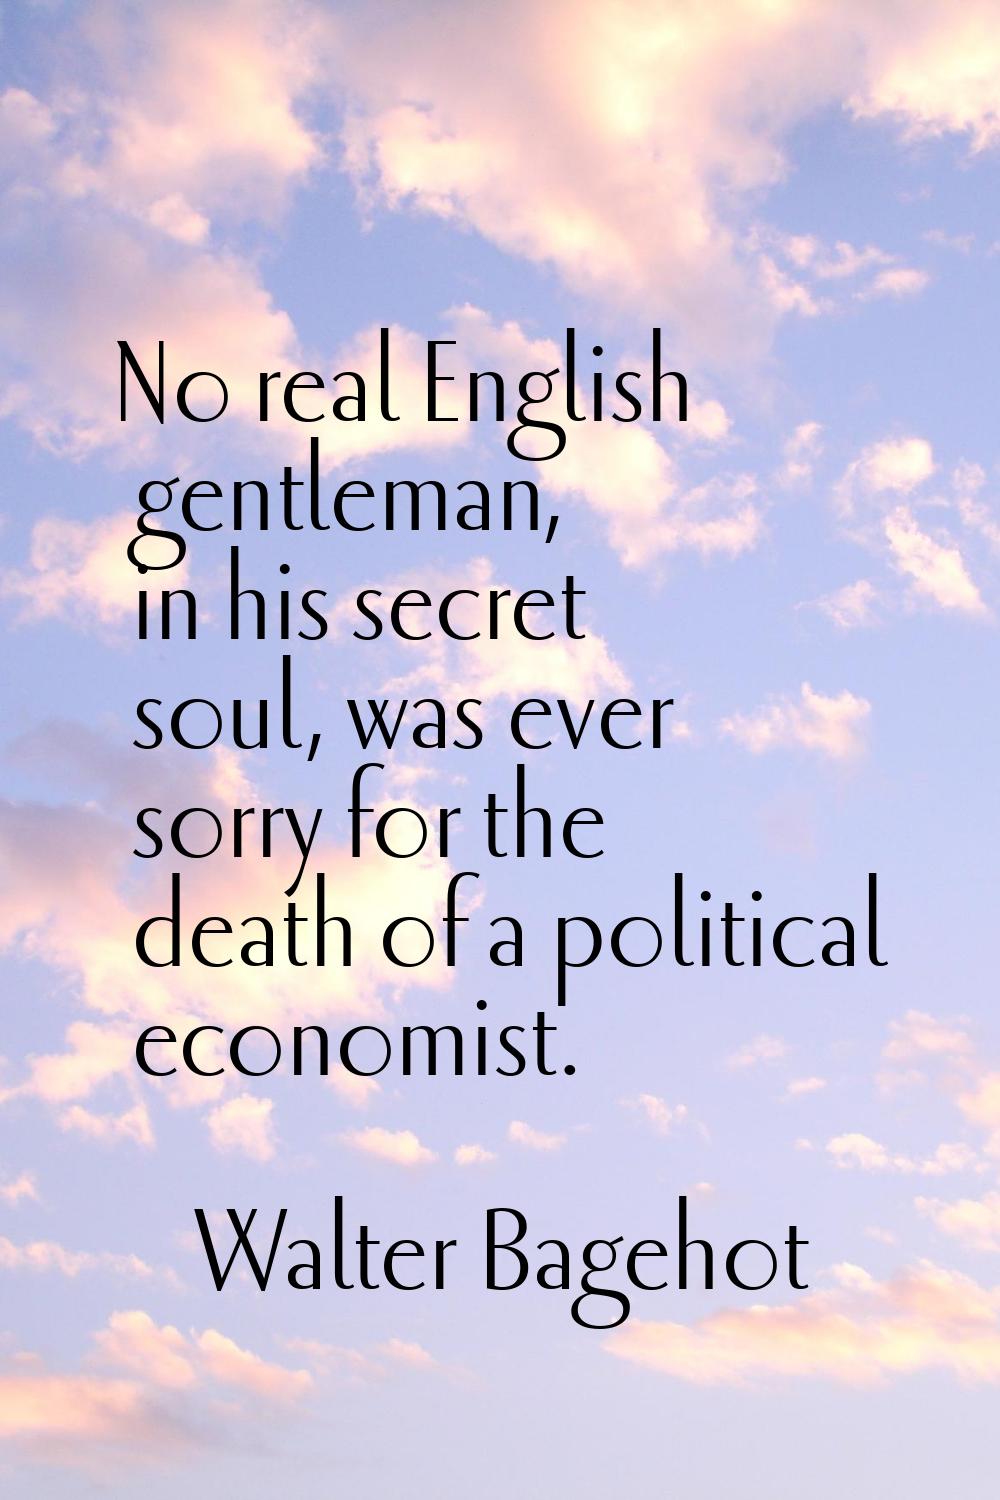 No real English gentleman, in his secret soul, was ever sorry for the death of a political economis